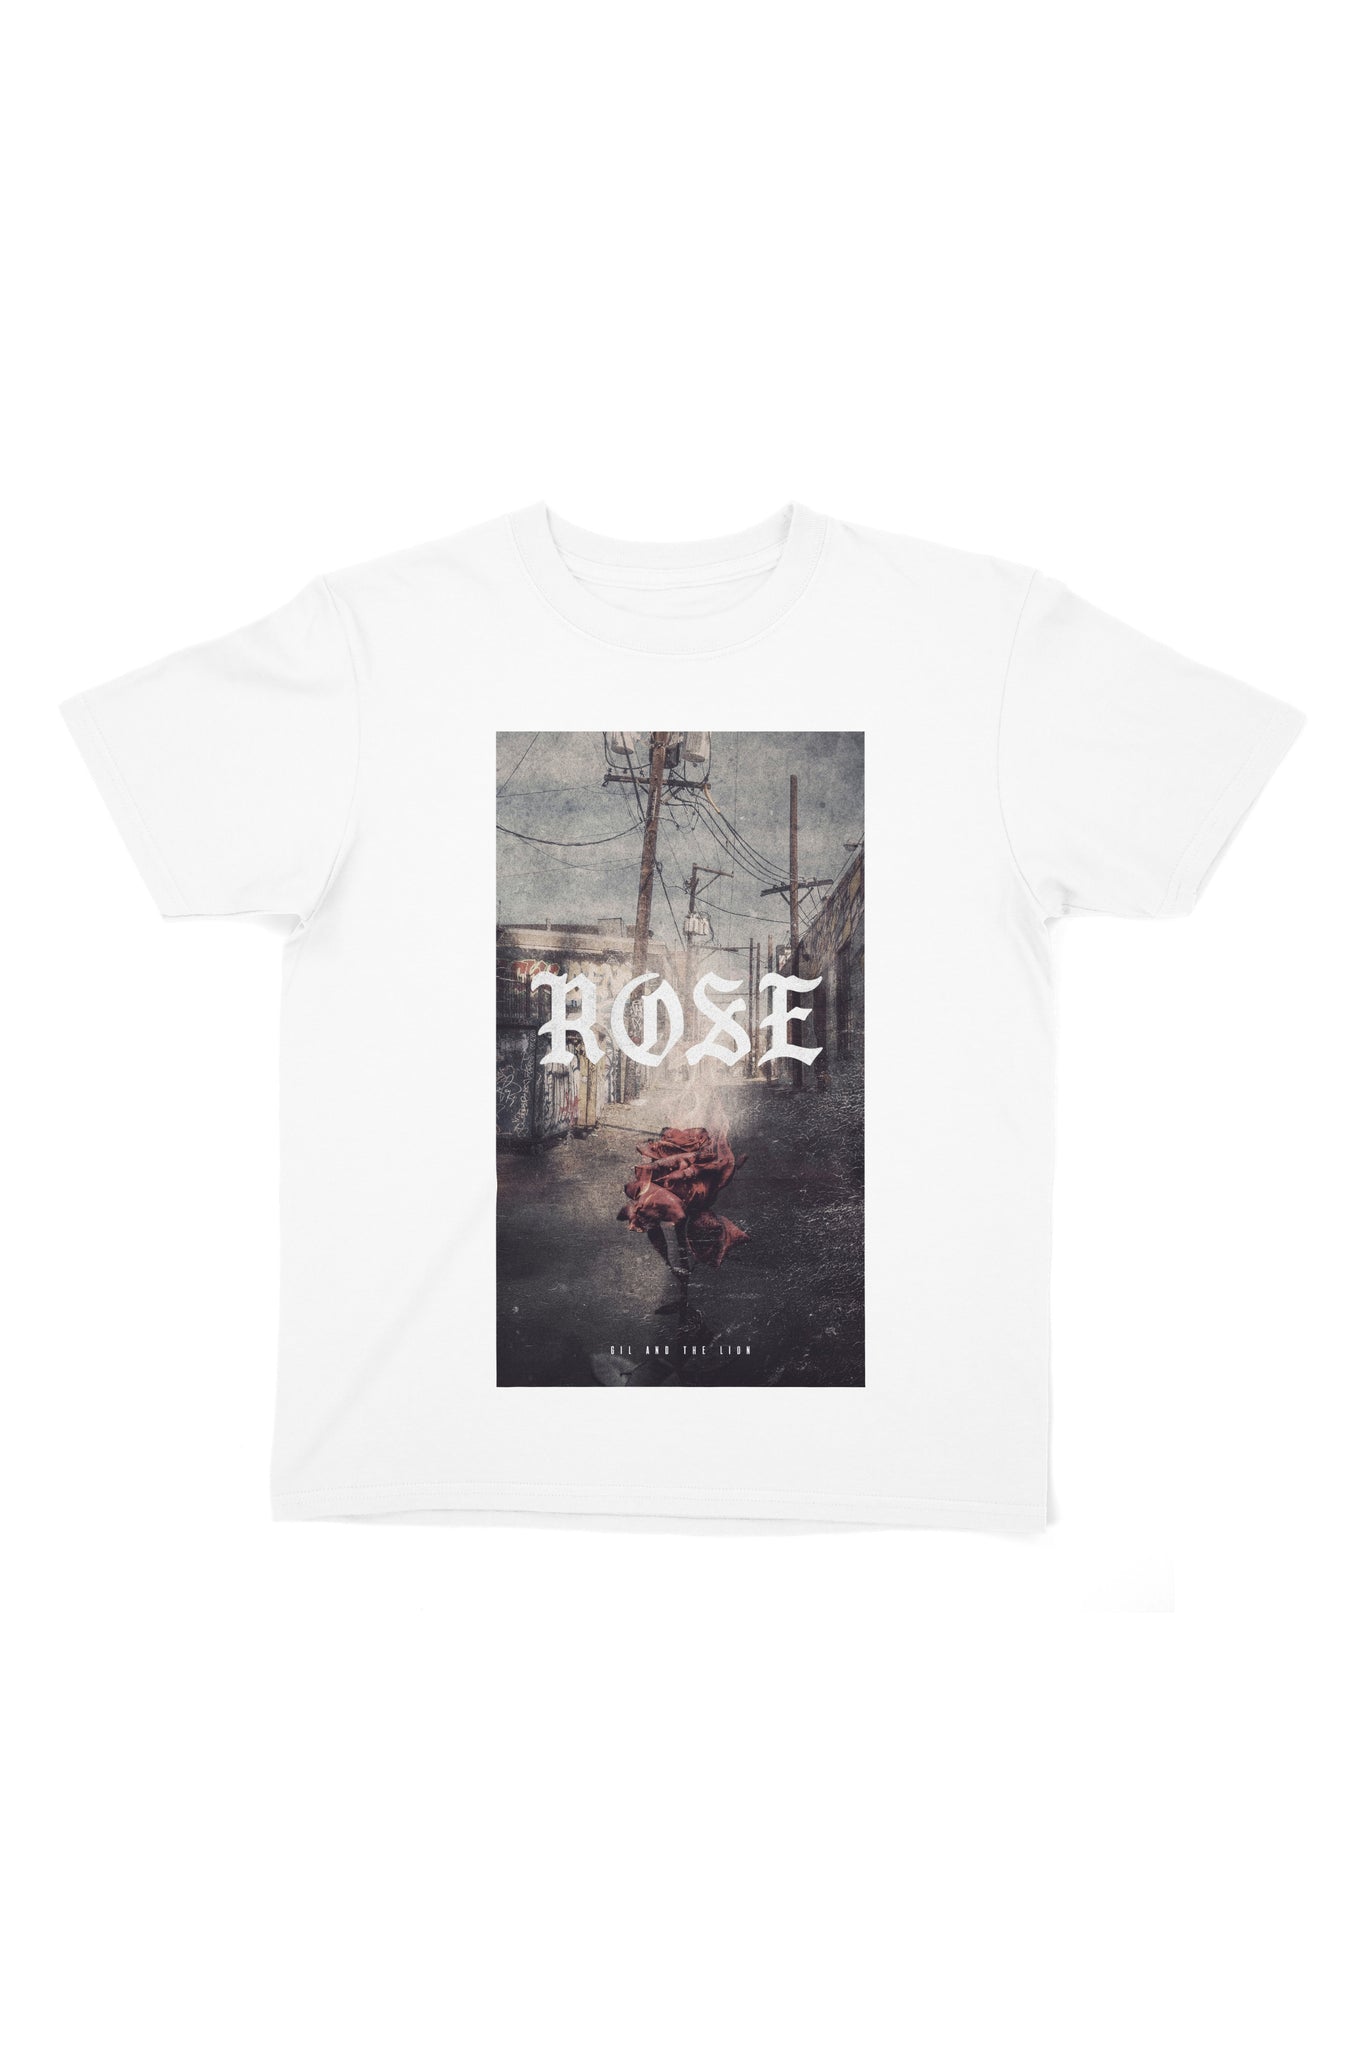 Gil and The Lion “Rose” Tee